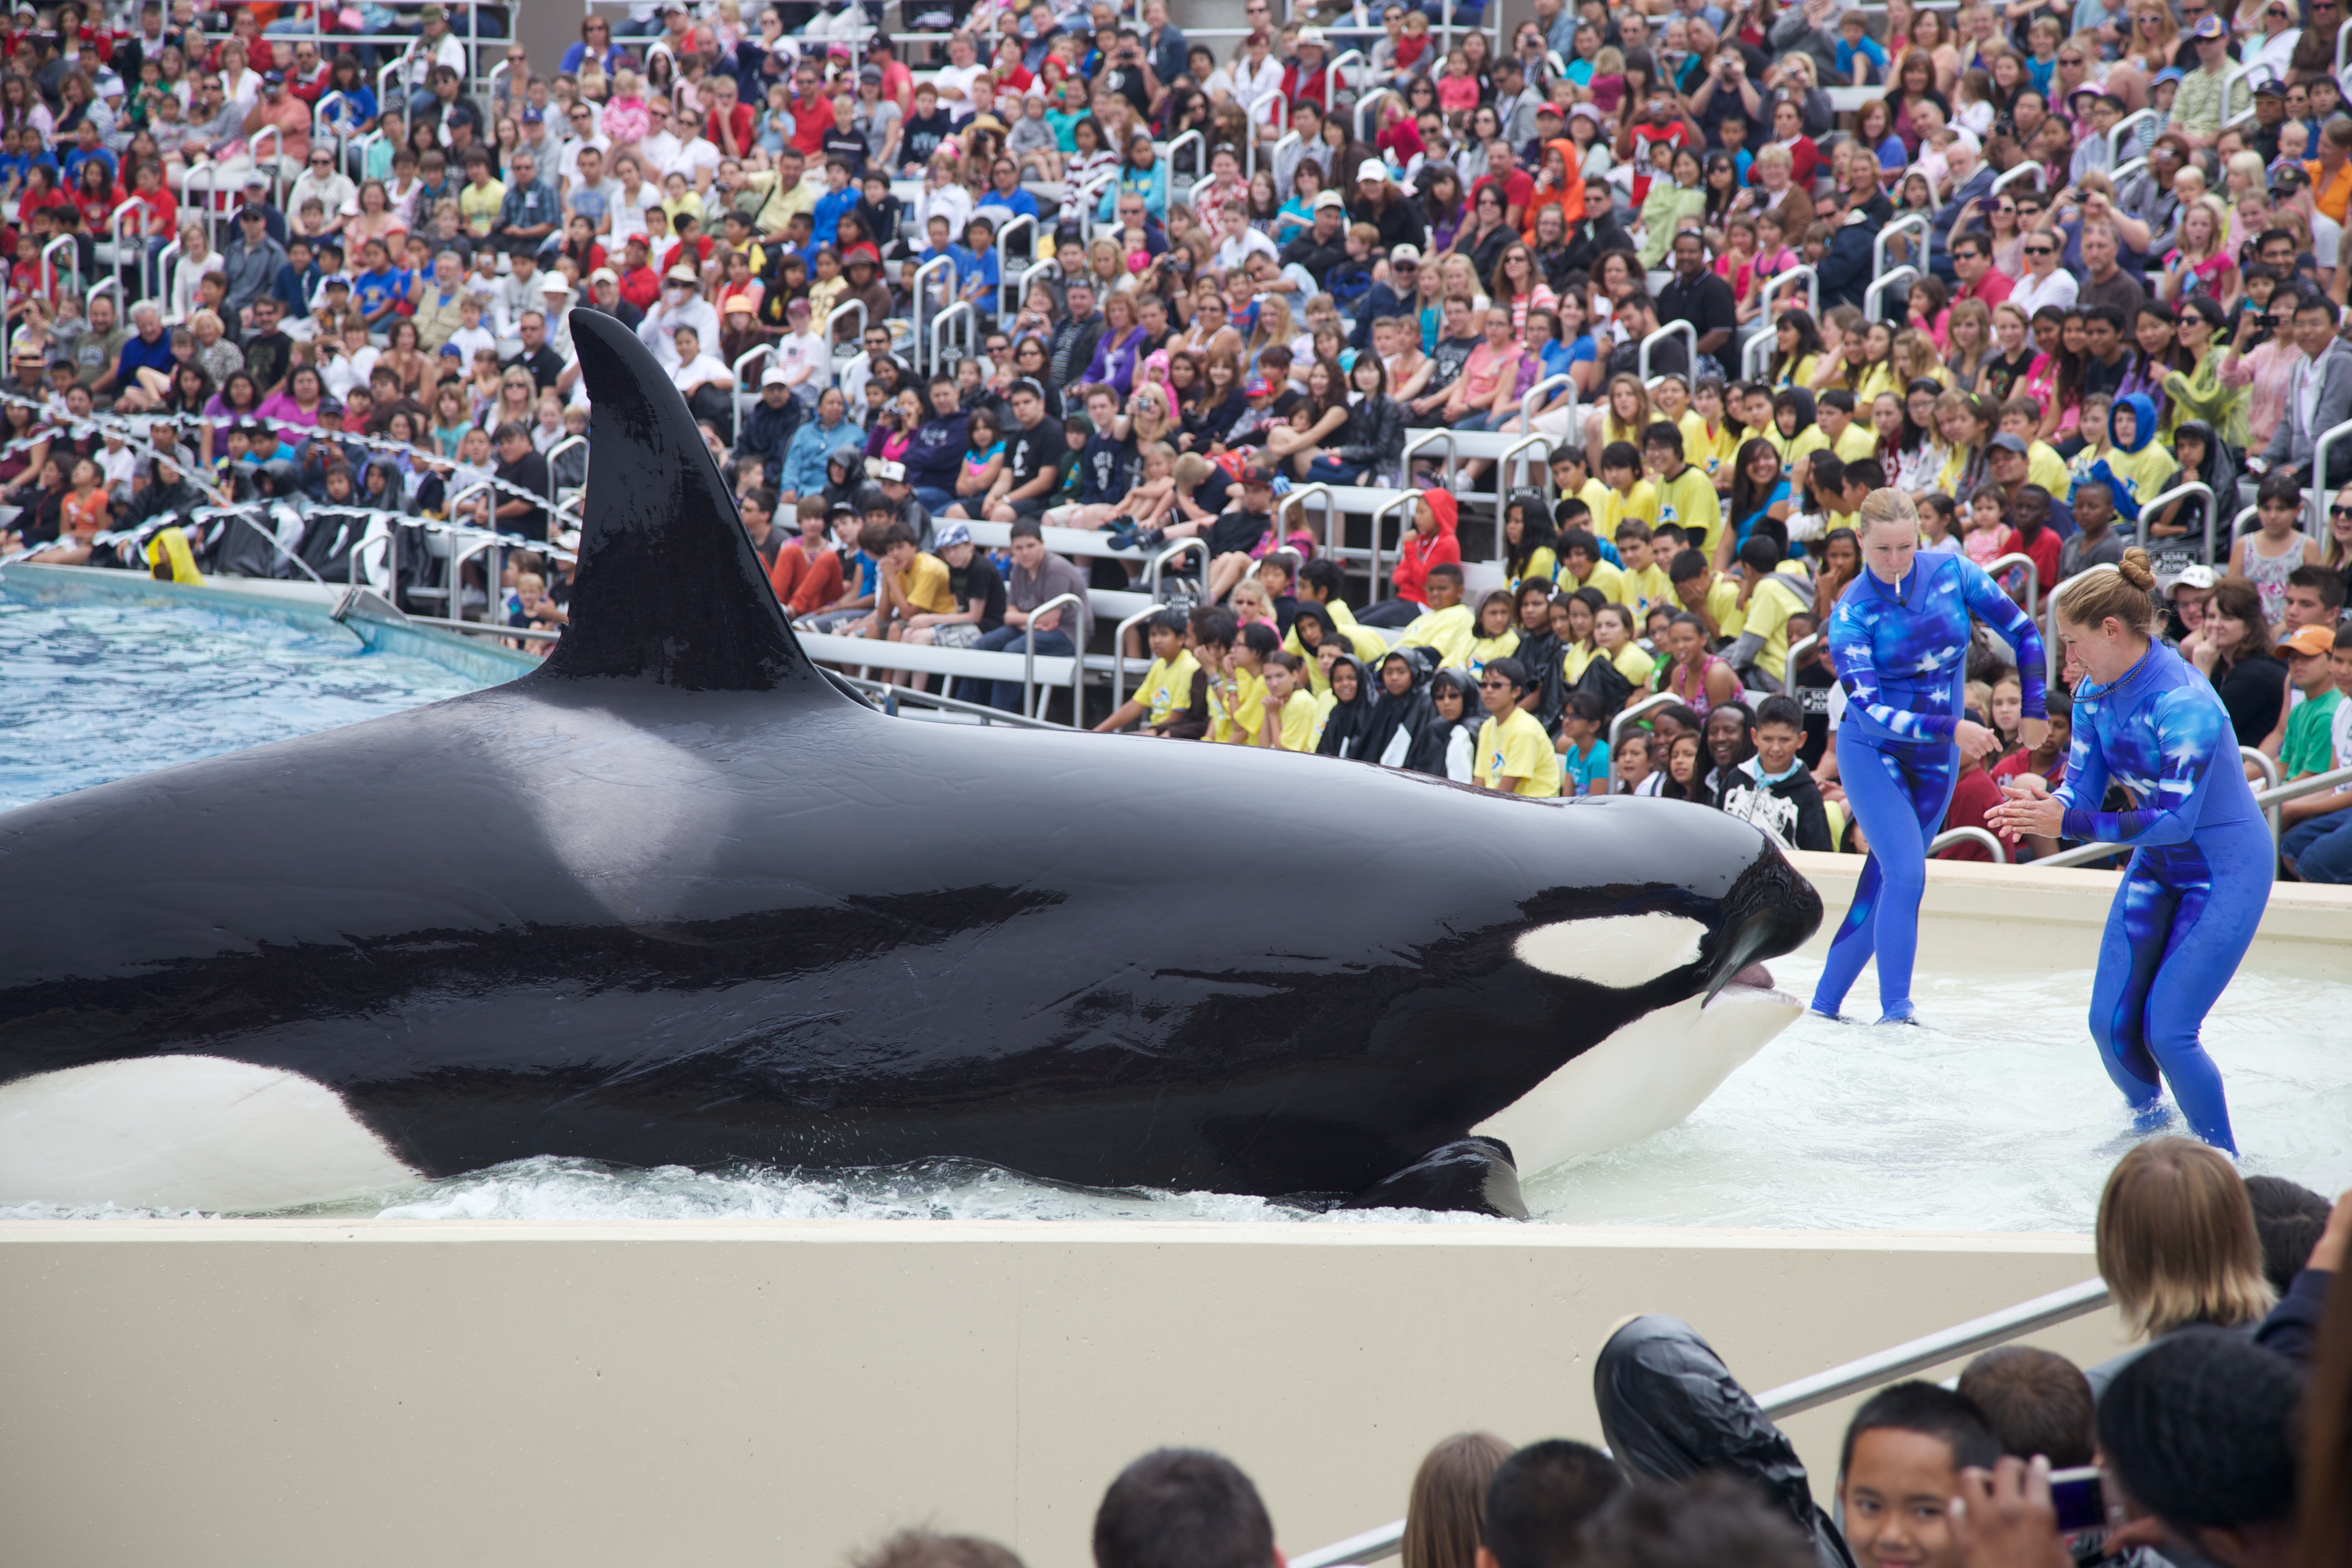 Orca show at SeaWorld San Diego, June 2011.